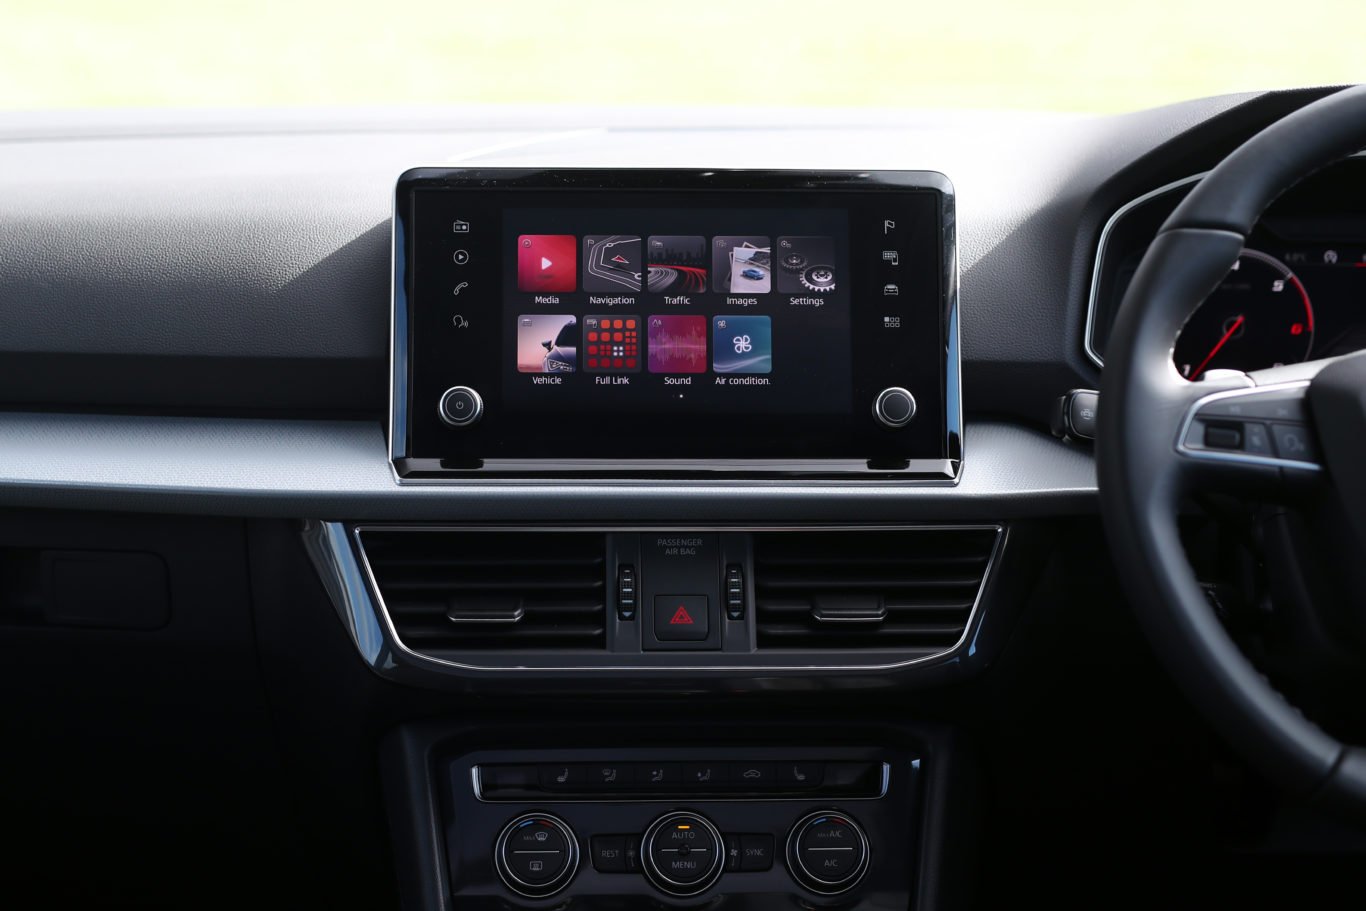 A large infotainment screen is fitted as standard